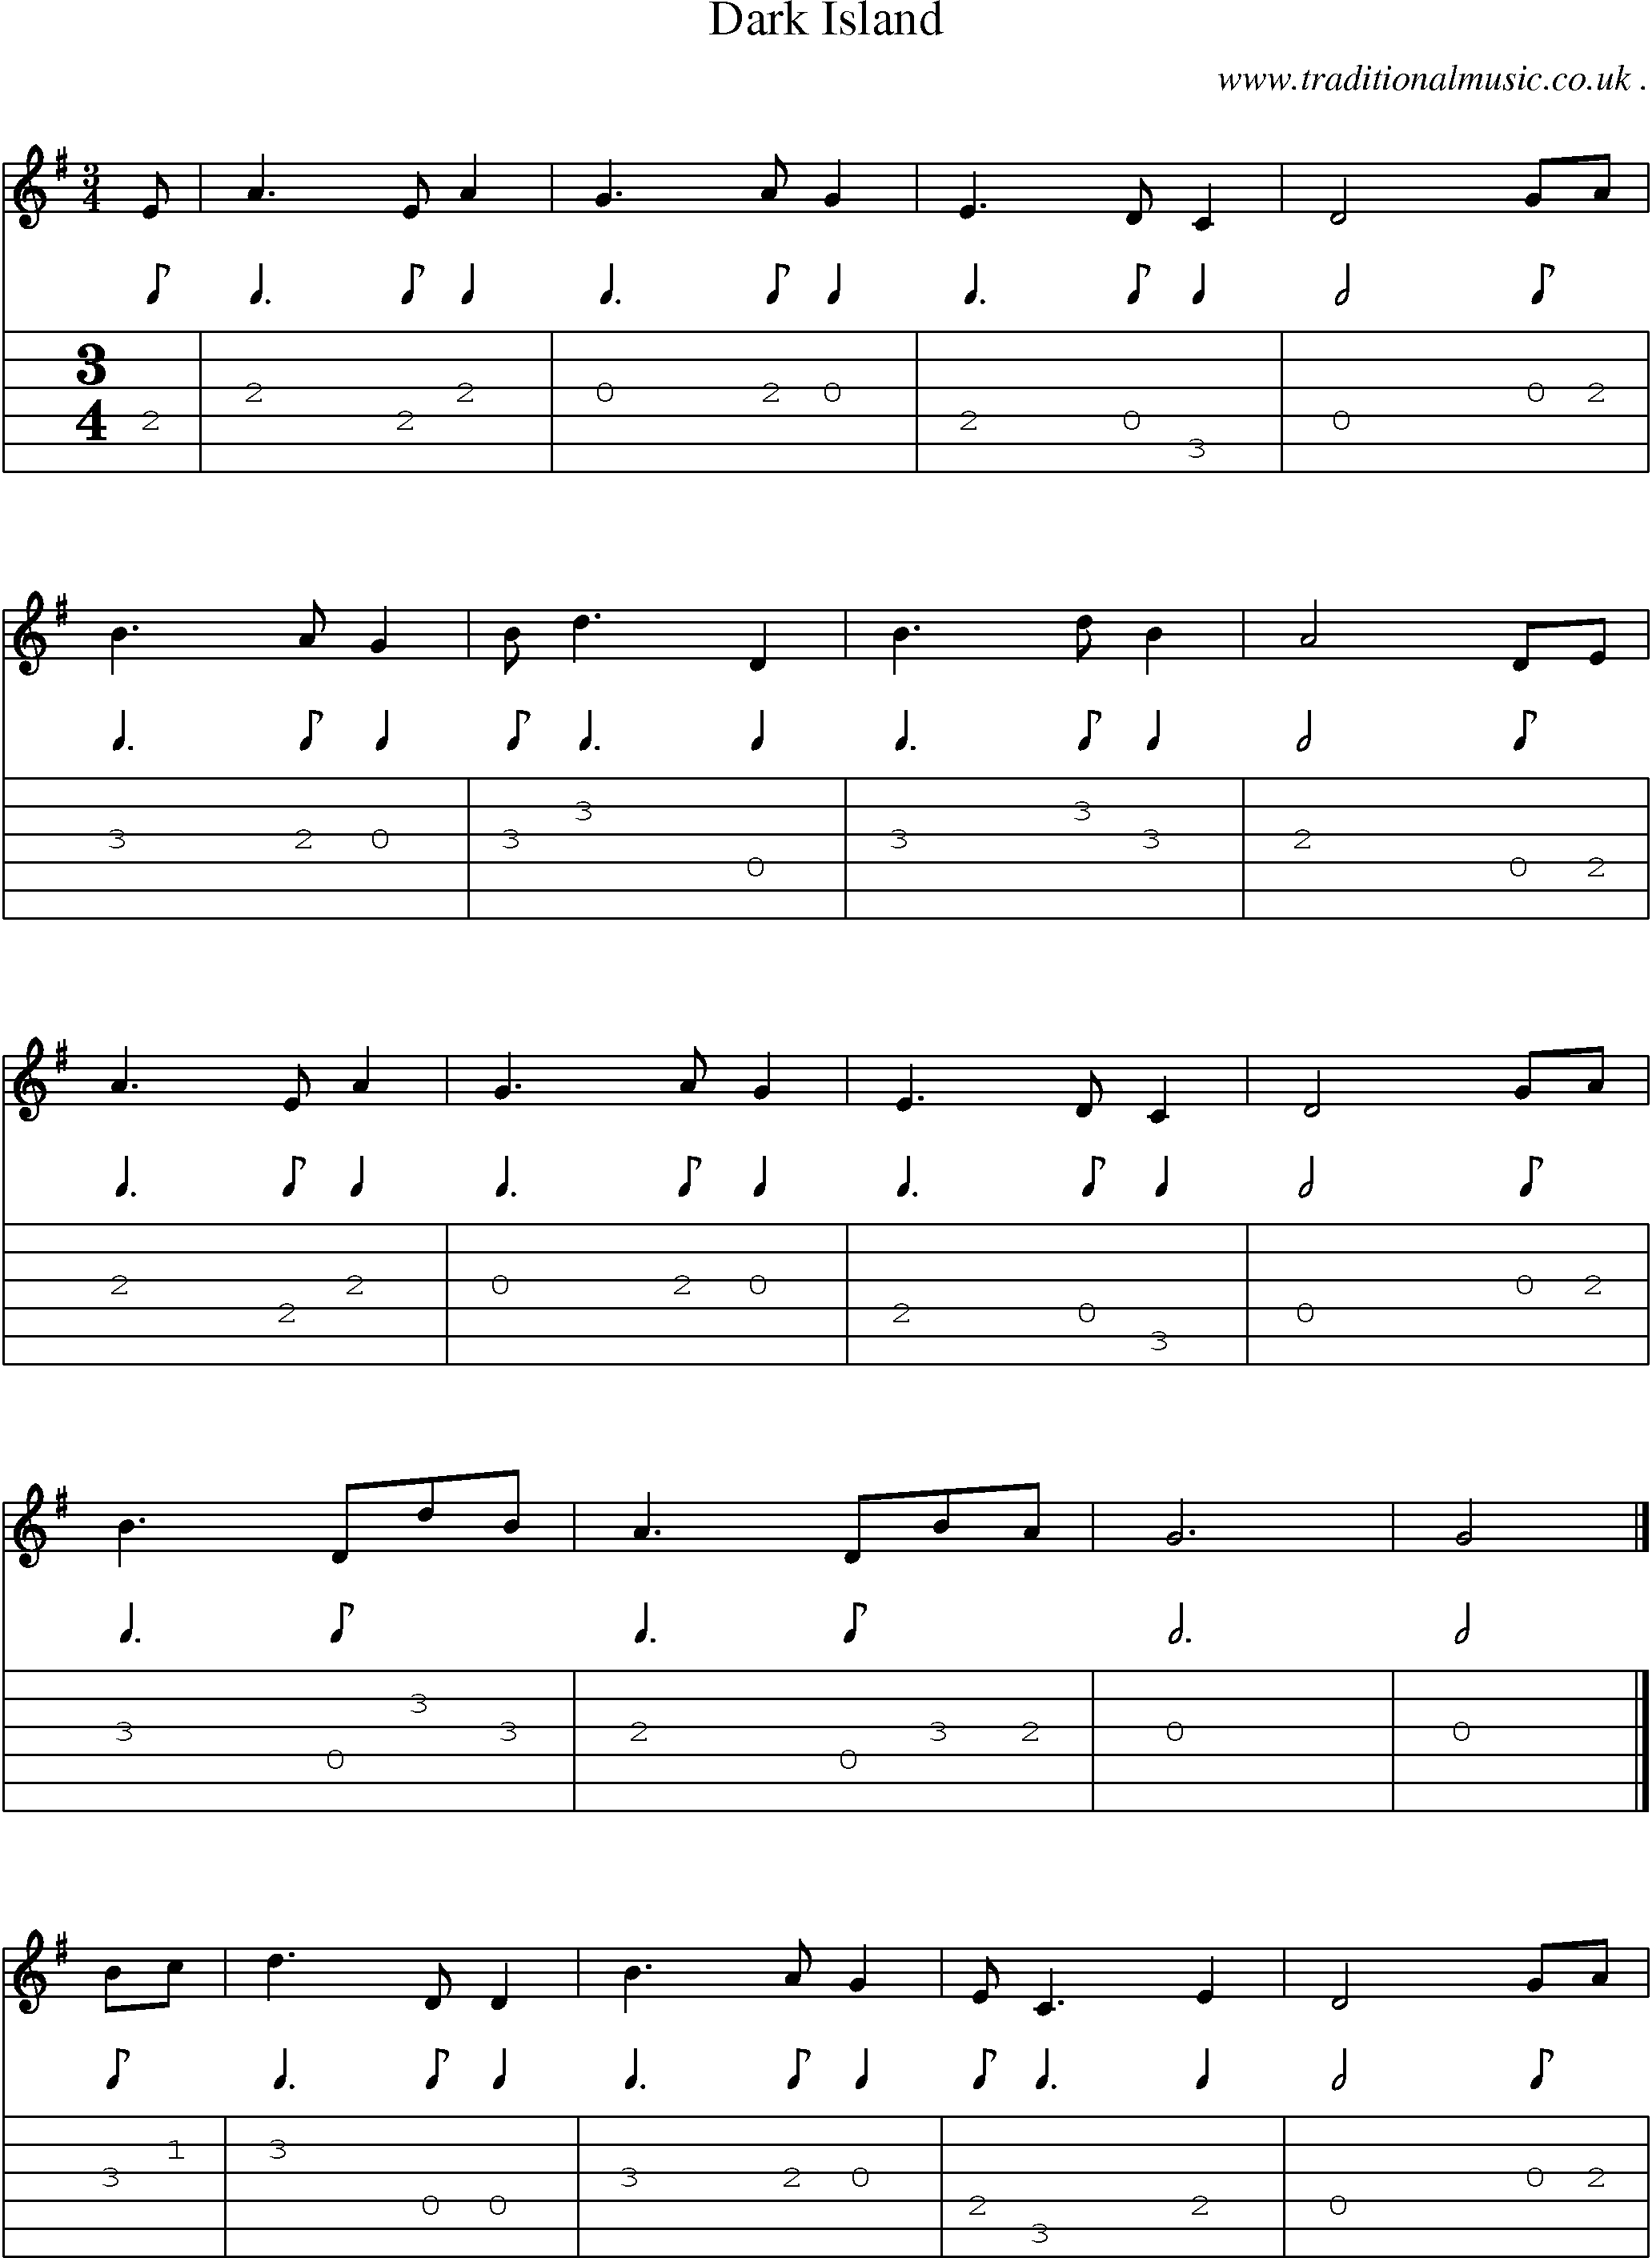 Sheet-music  score, Chords and Guitar Tabs for Dark Island